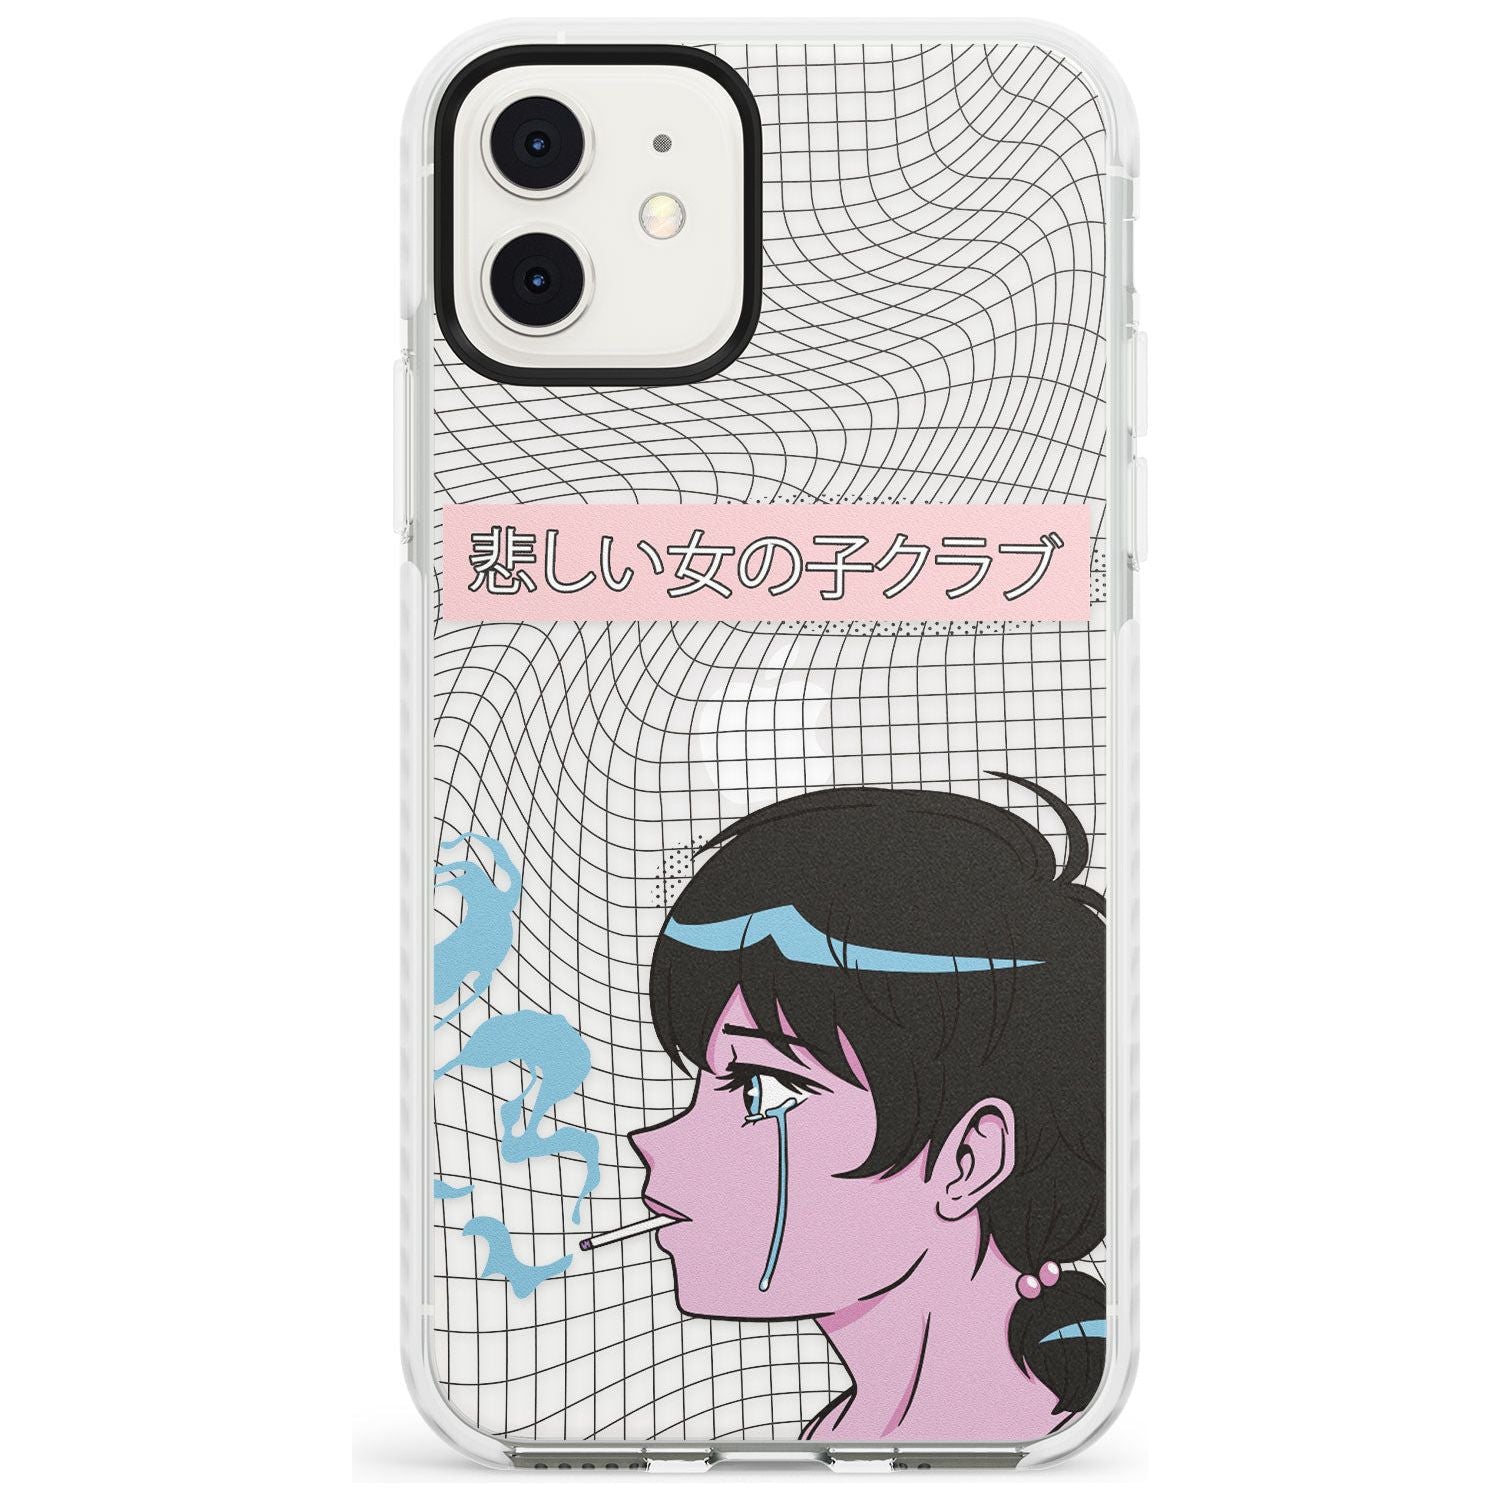 Lost Love Impact Phone Case for iPhone 11